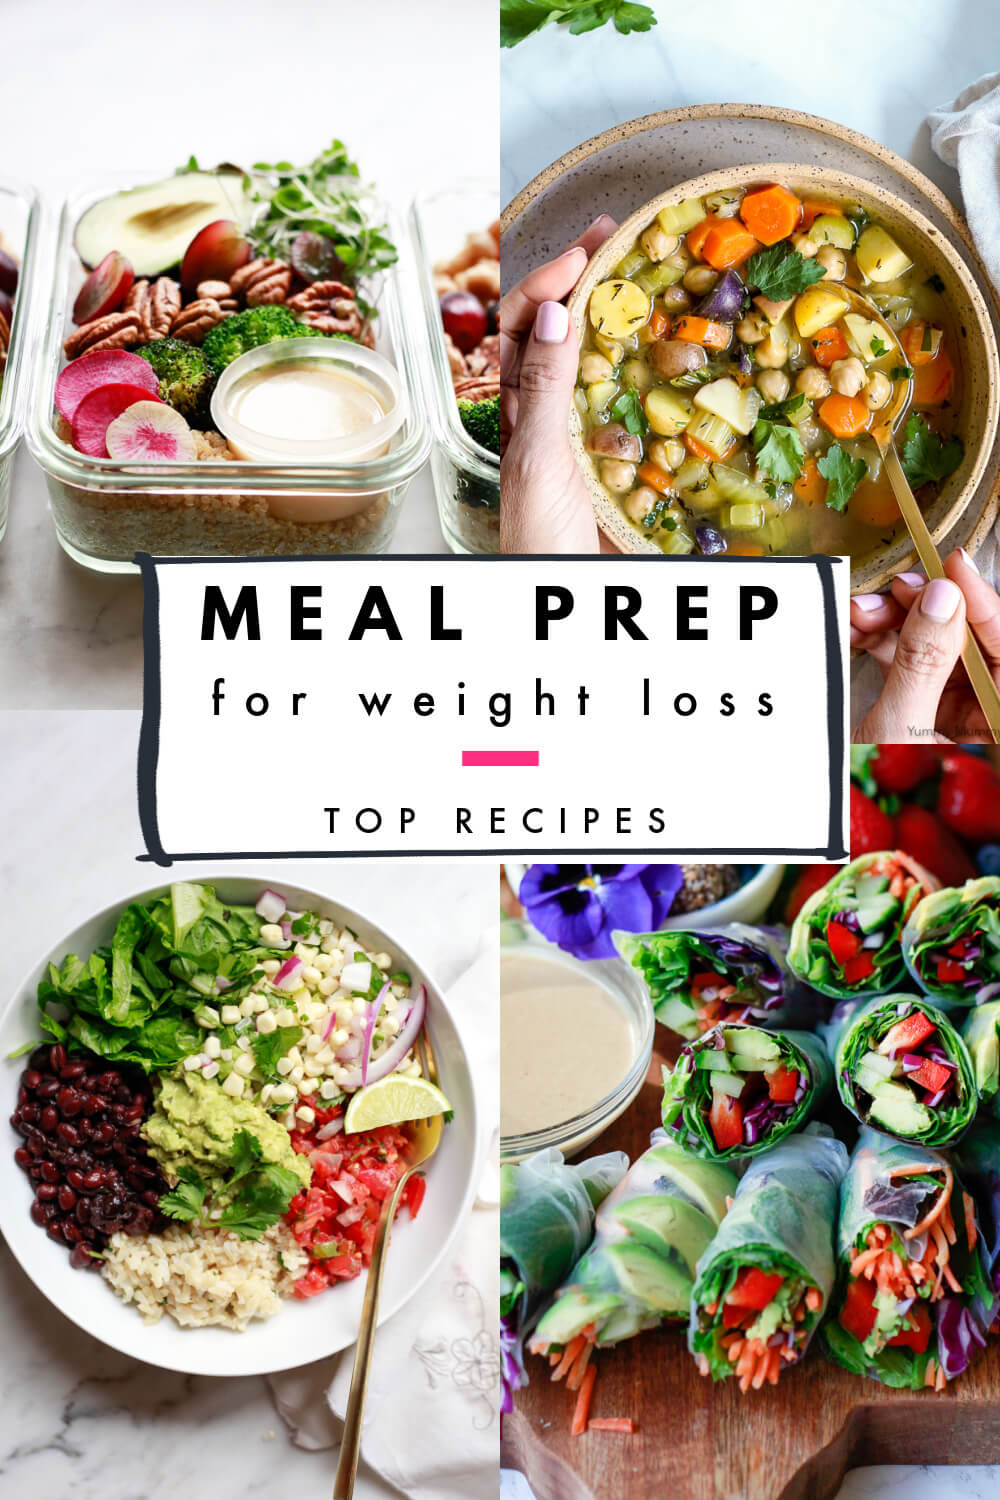 Meal Prep Ideas for Weight Loss (Healthy + Budget Friendly)